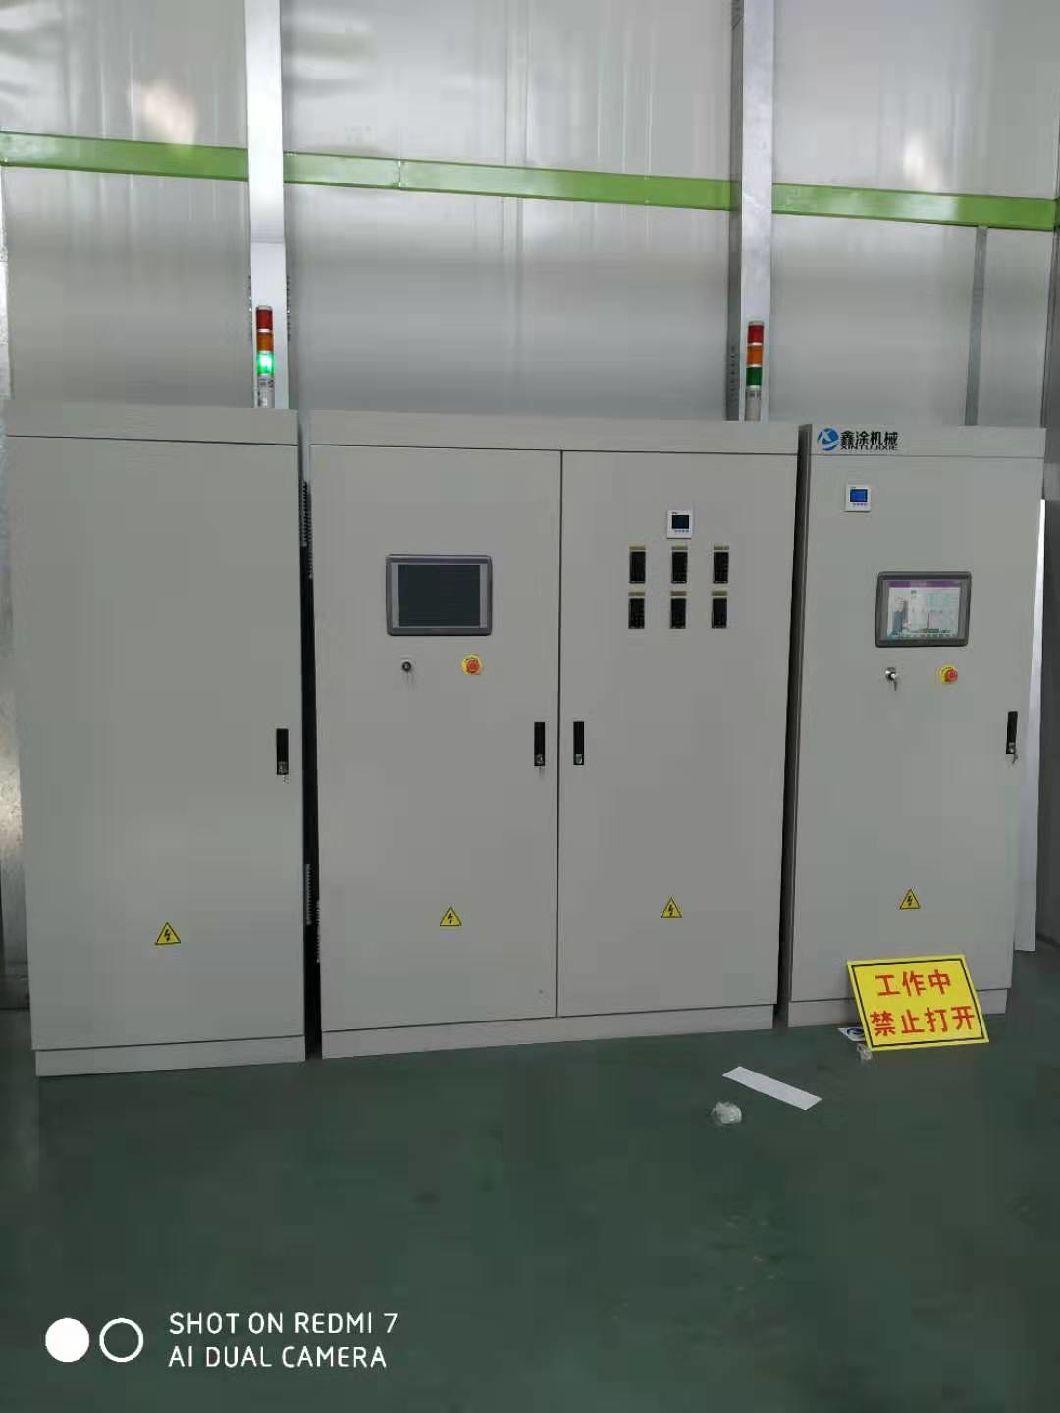 Ce Industrial Automatic Aluminium Profiles Powder Coating Painting Production Line for Many Countries